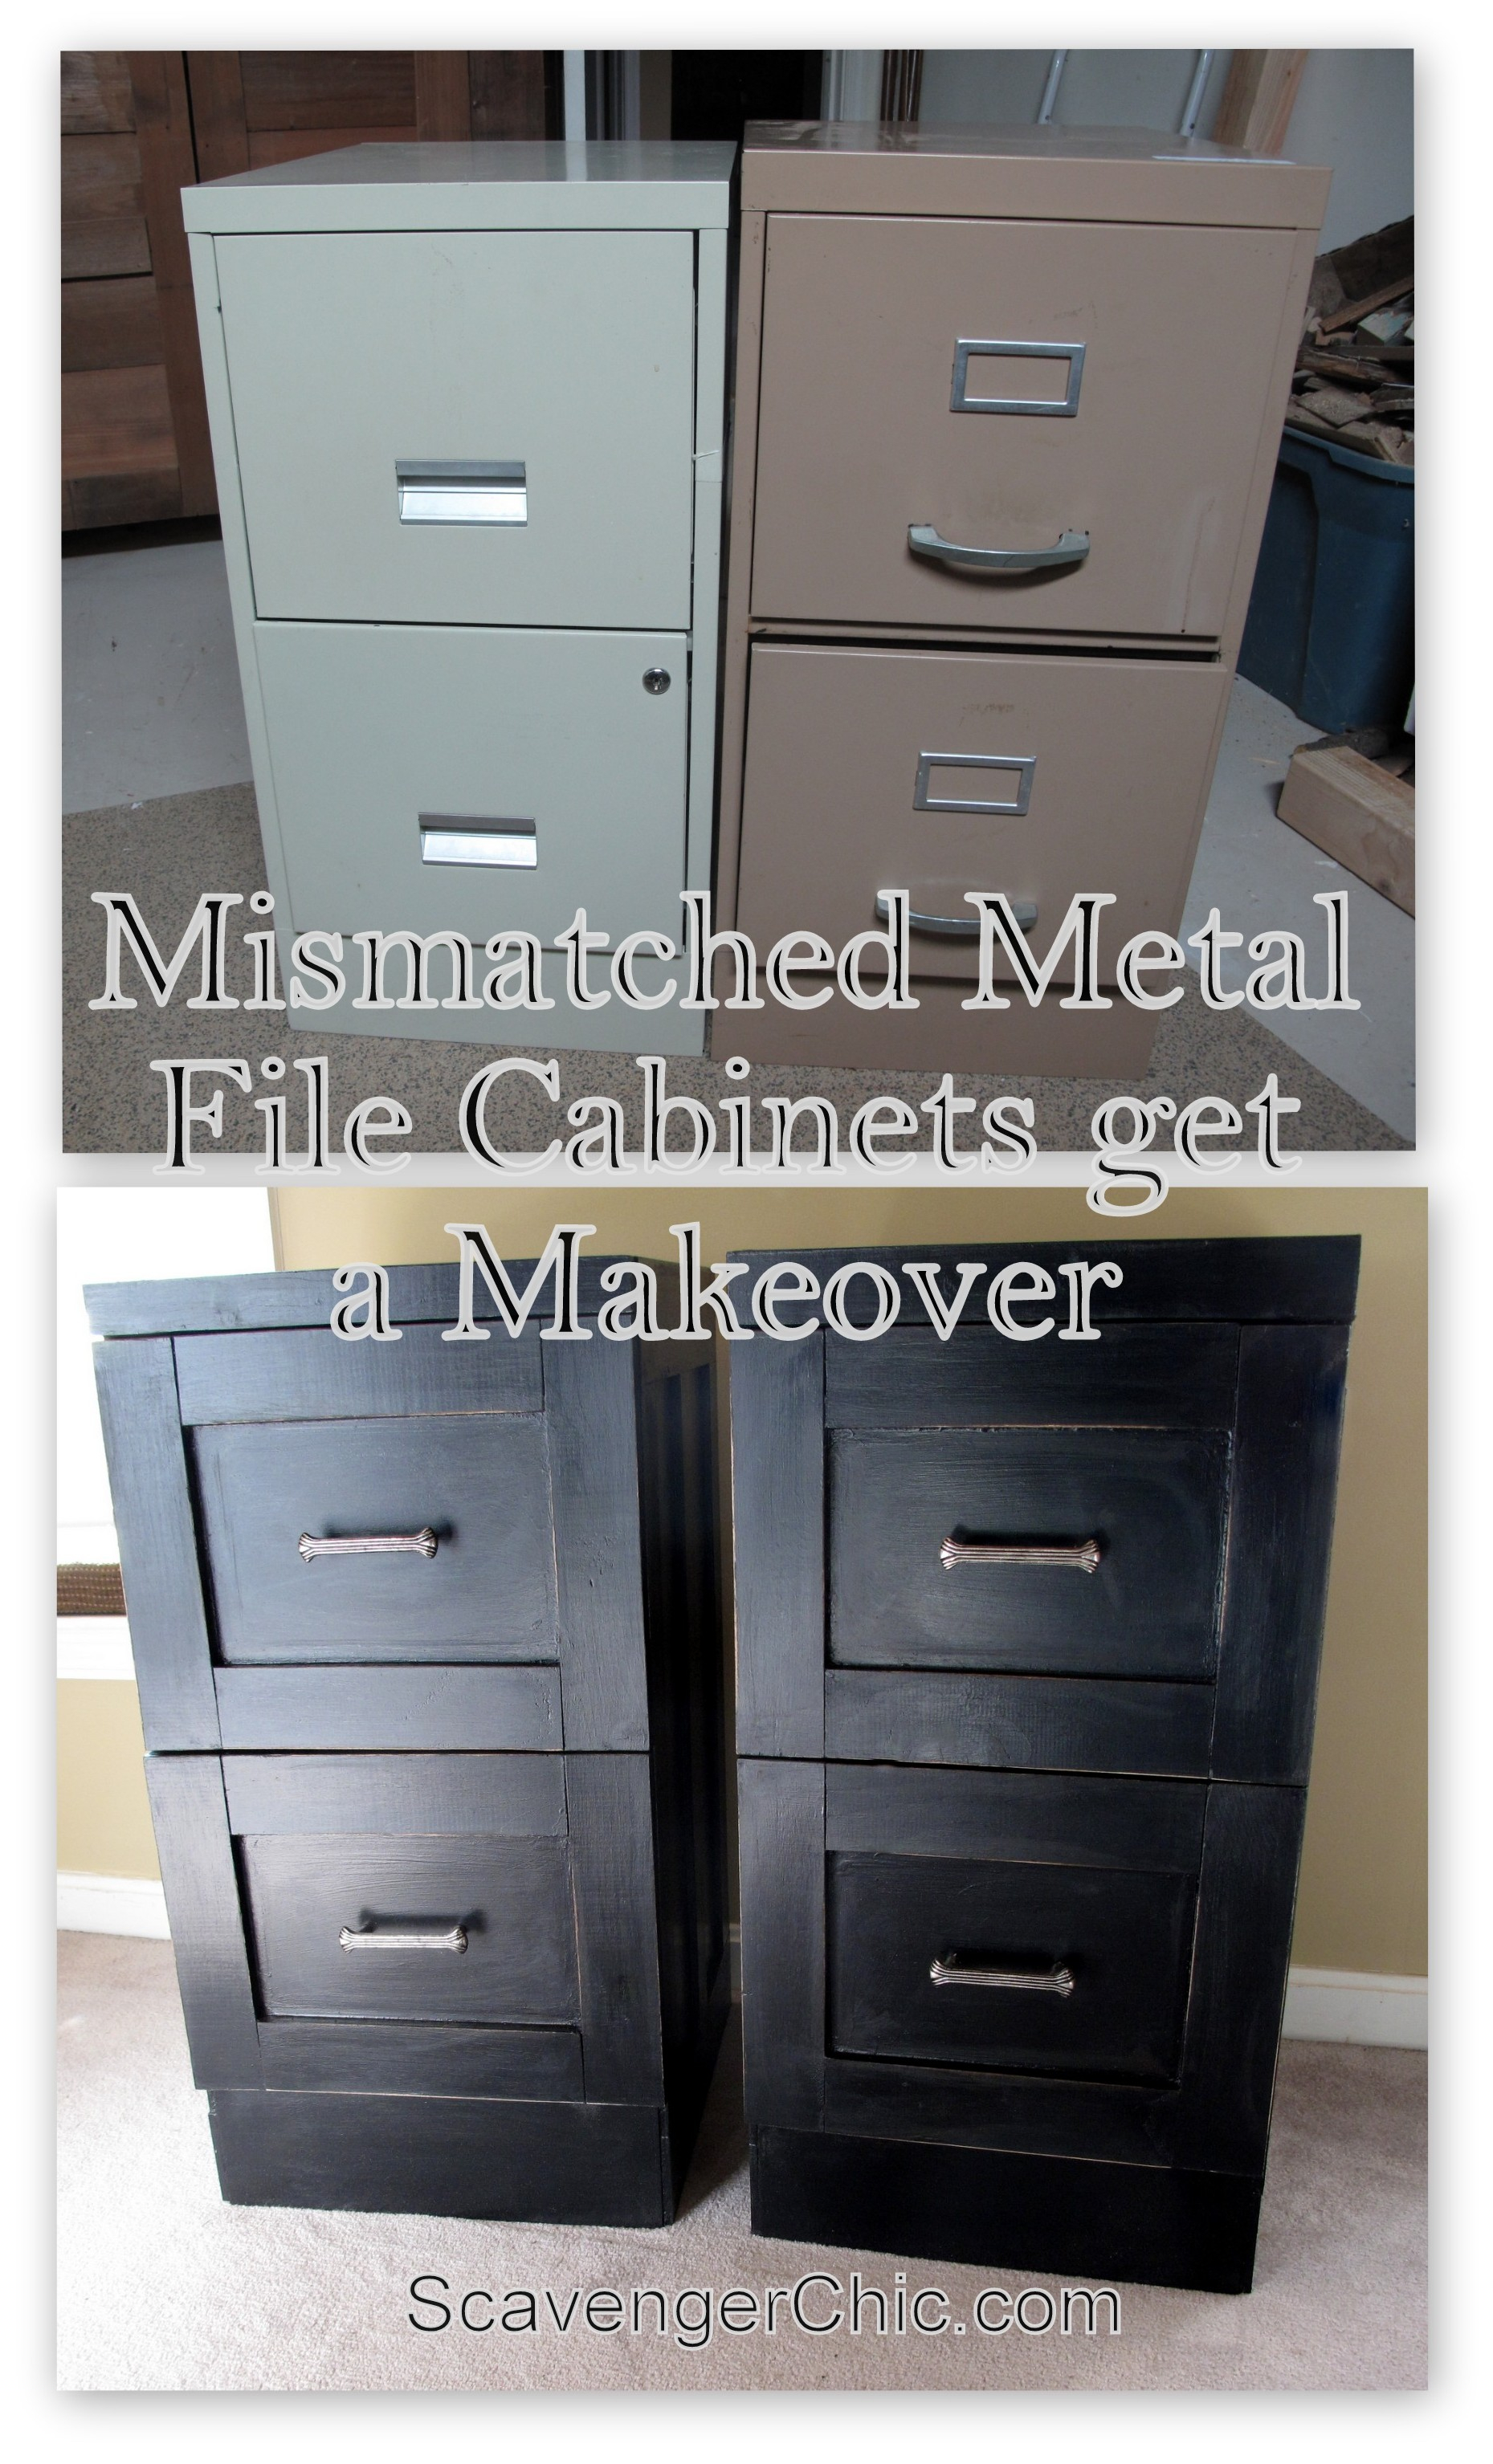 Mismatched Metal File Cabinets Get A Makeover Scavenger Chic throughout size 1859 X 3069